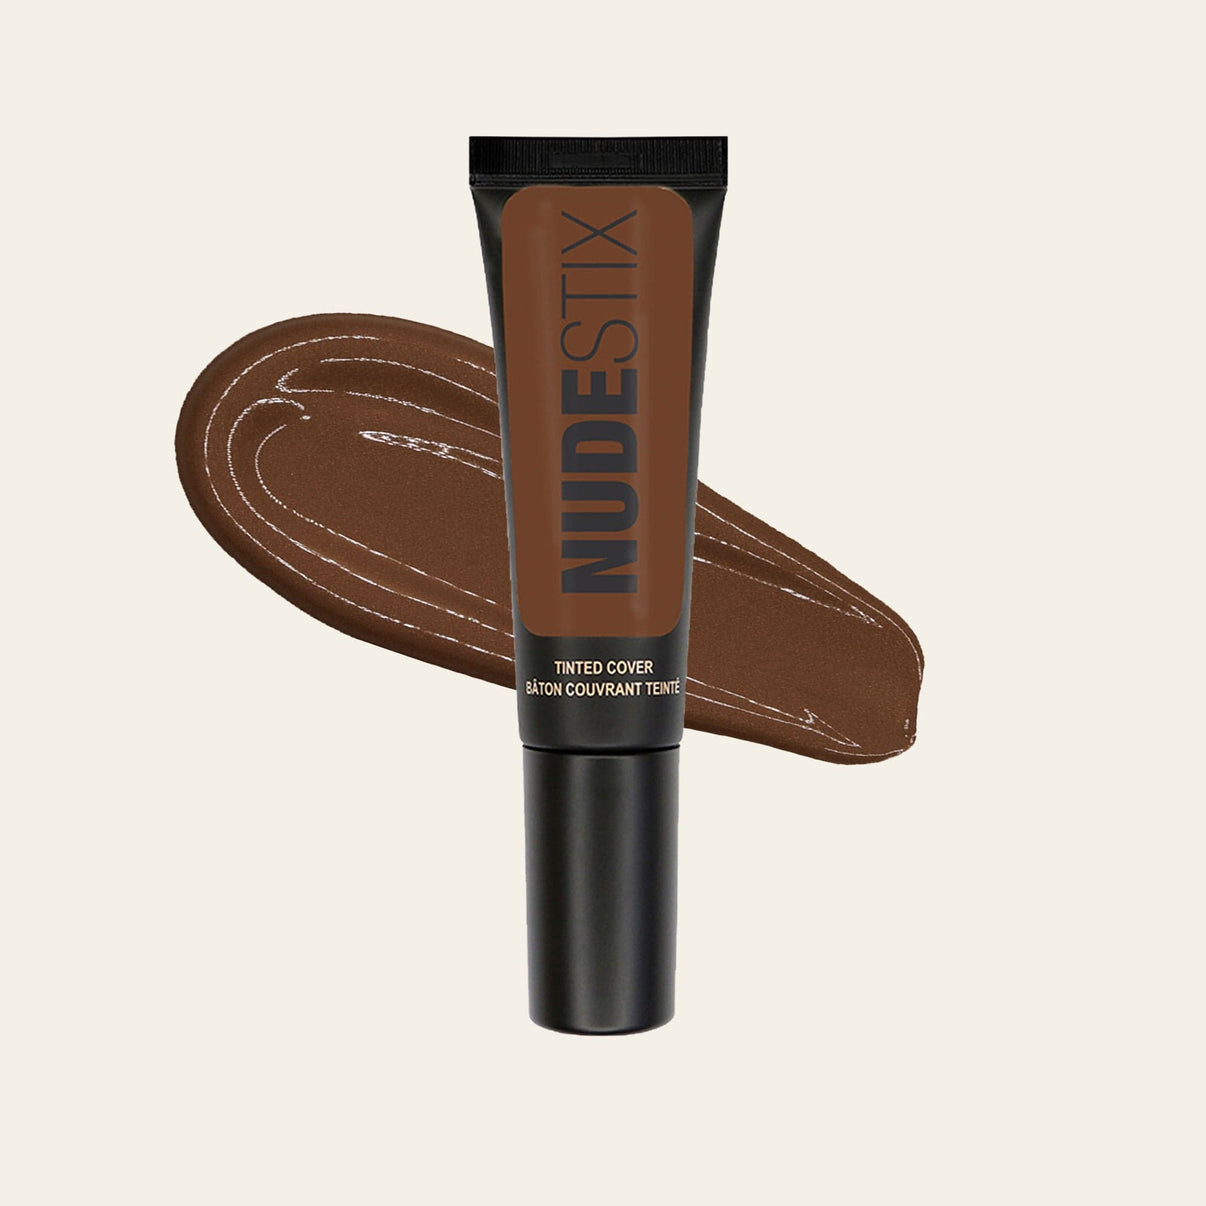 Tinted Cover Liquid Foundation in shade nude 11